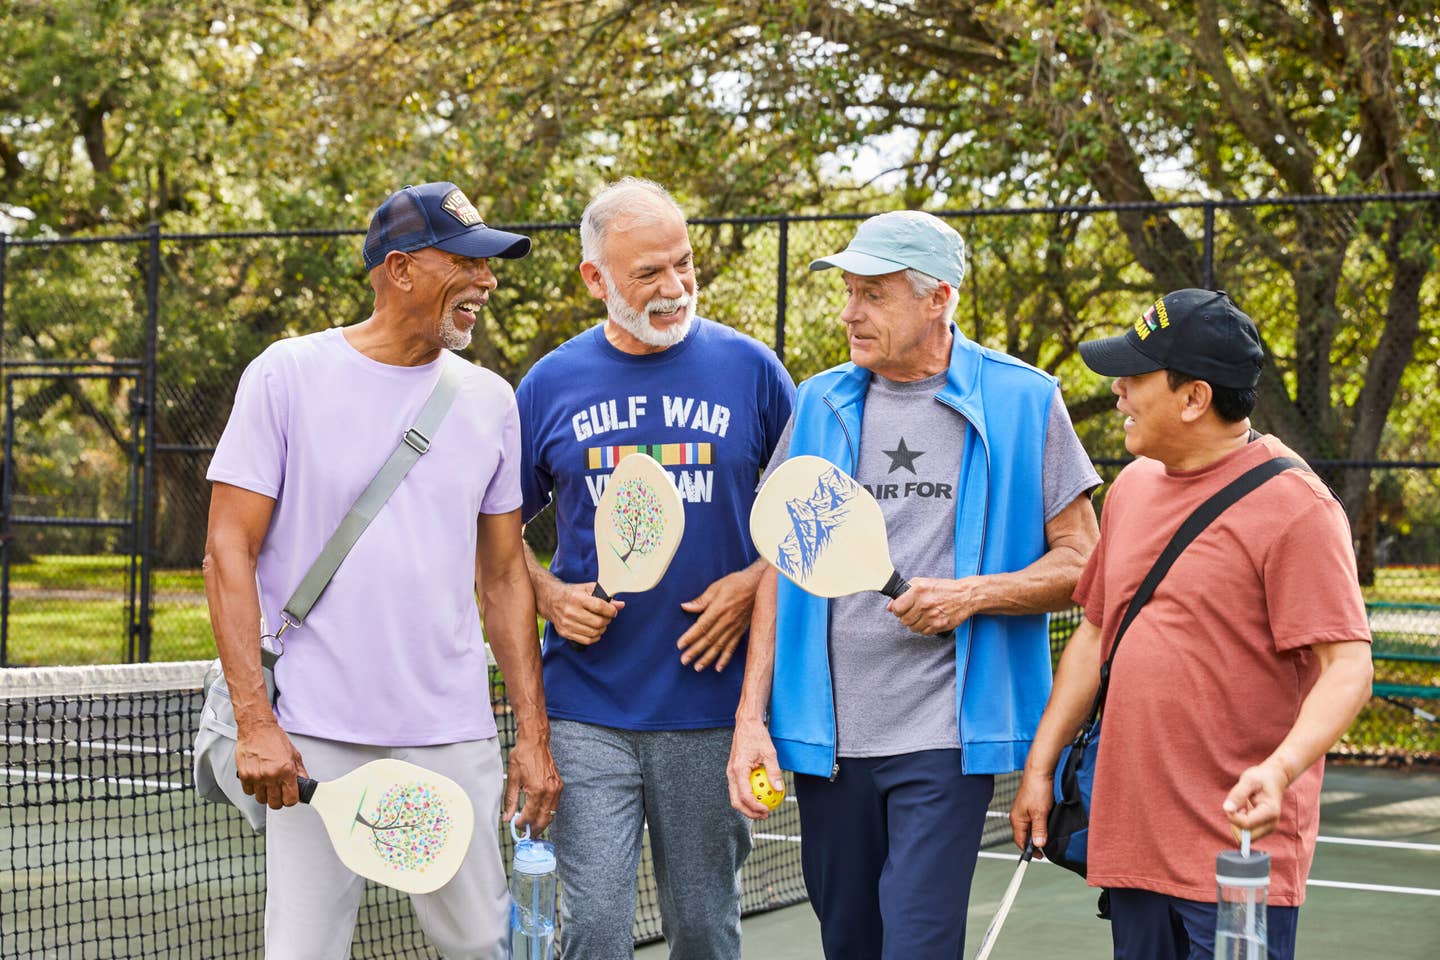 Active veterans playing pickleball and laughing.